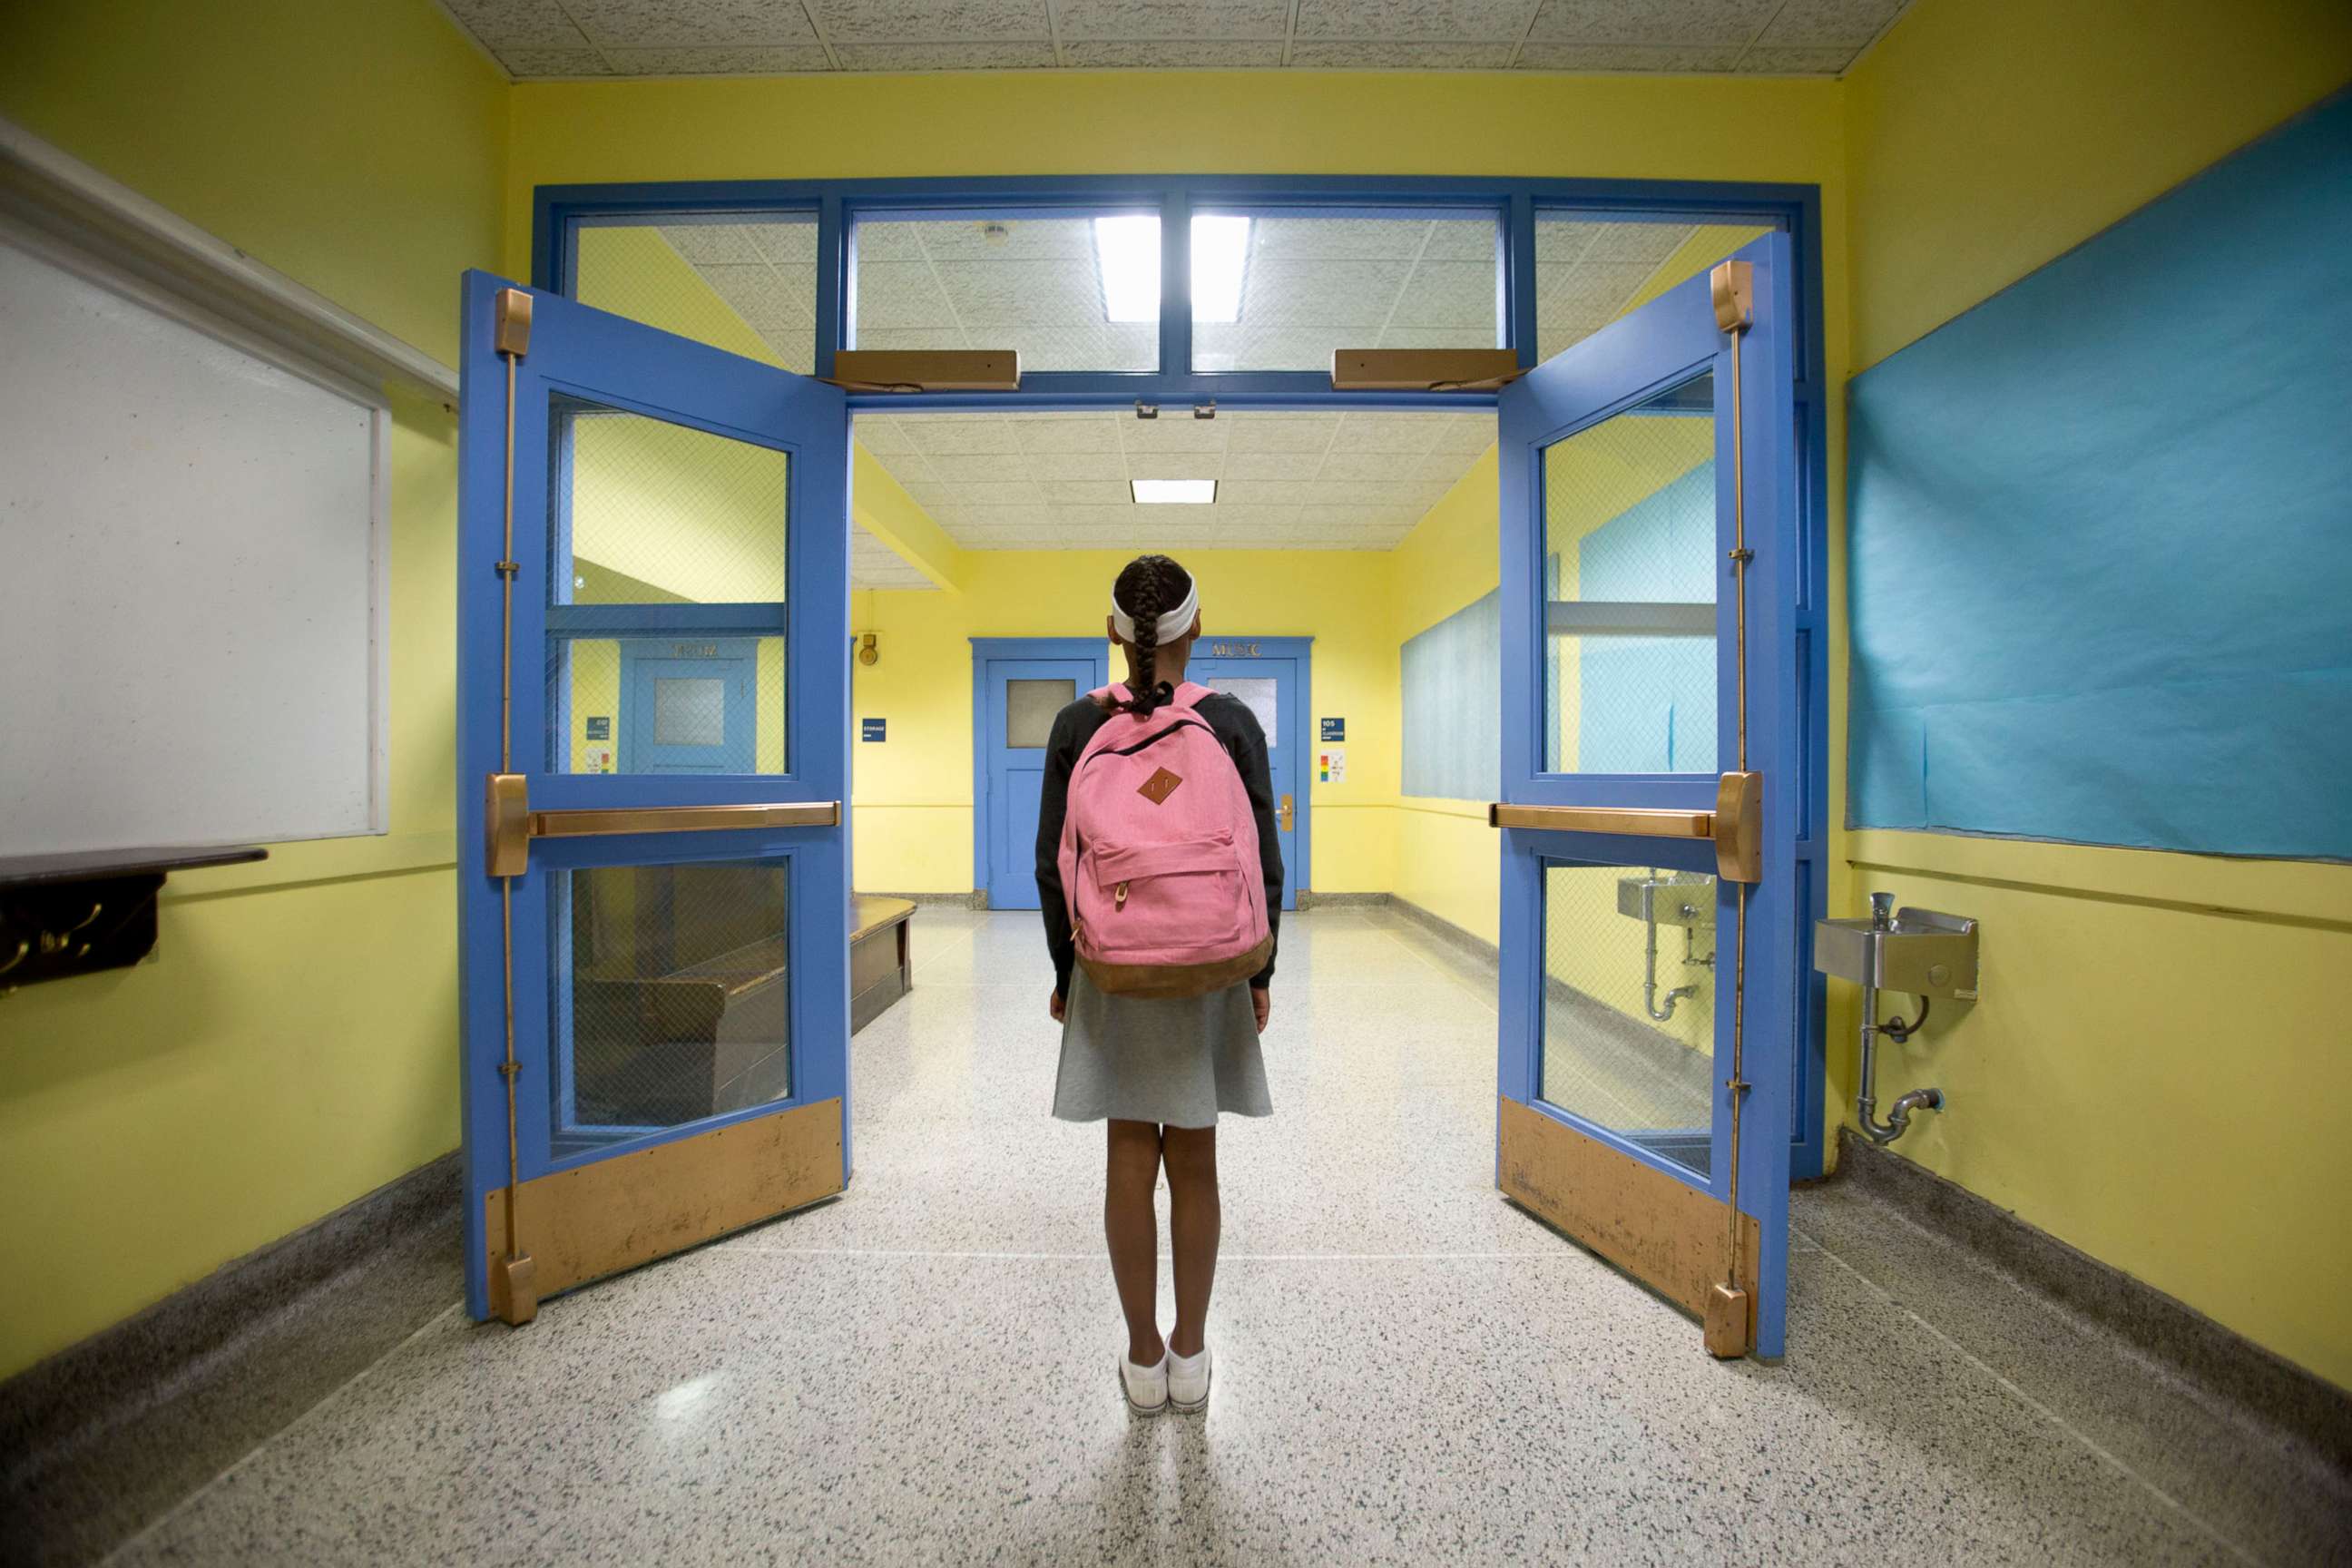 PHOTO: An eleven-year-old girl is pictured looking down school corridor in this undated stock image.